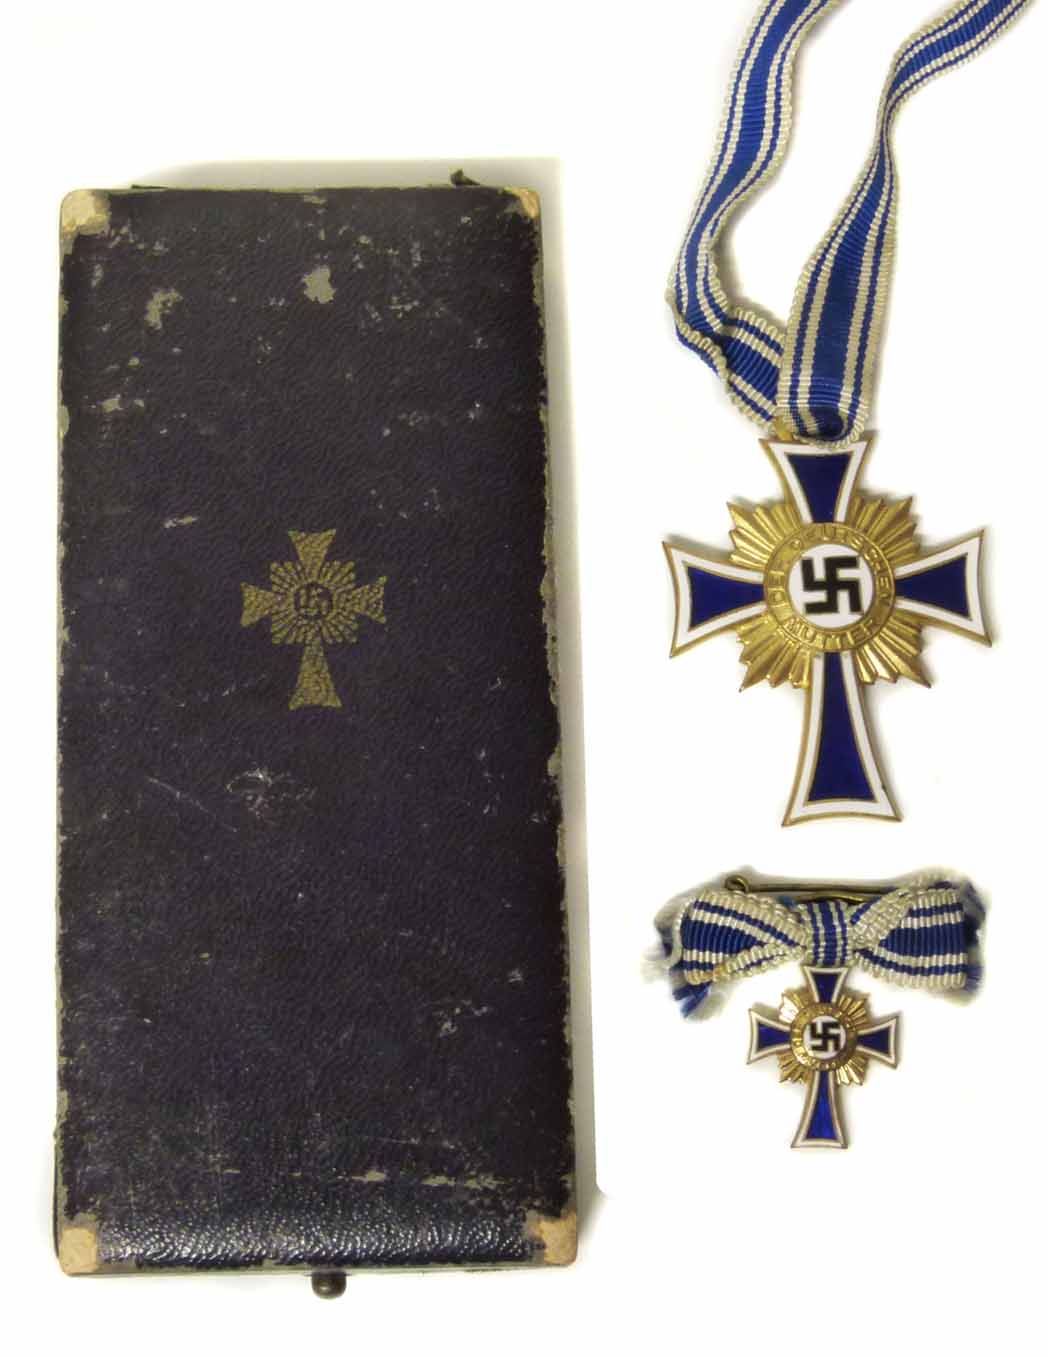 German Third Reich blue mothers cross collected by George Hill of the Parachute Regiment whilst